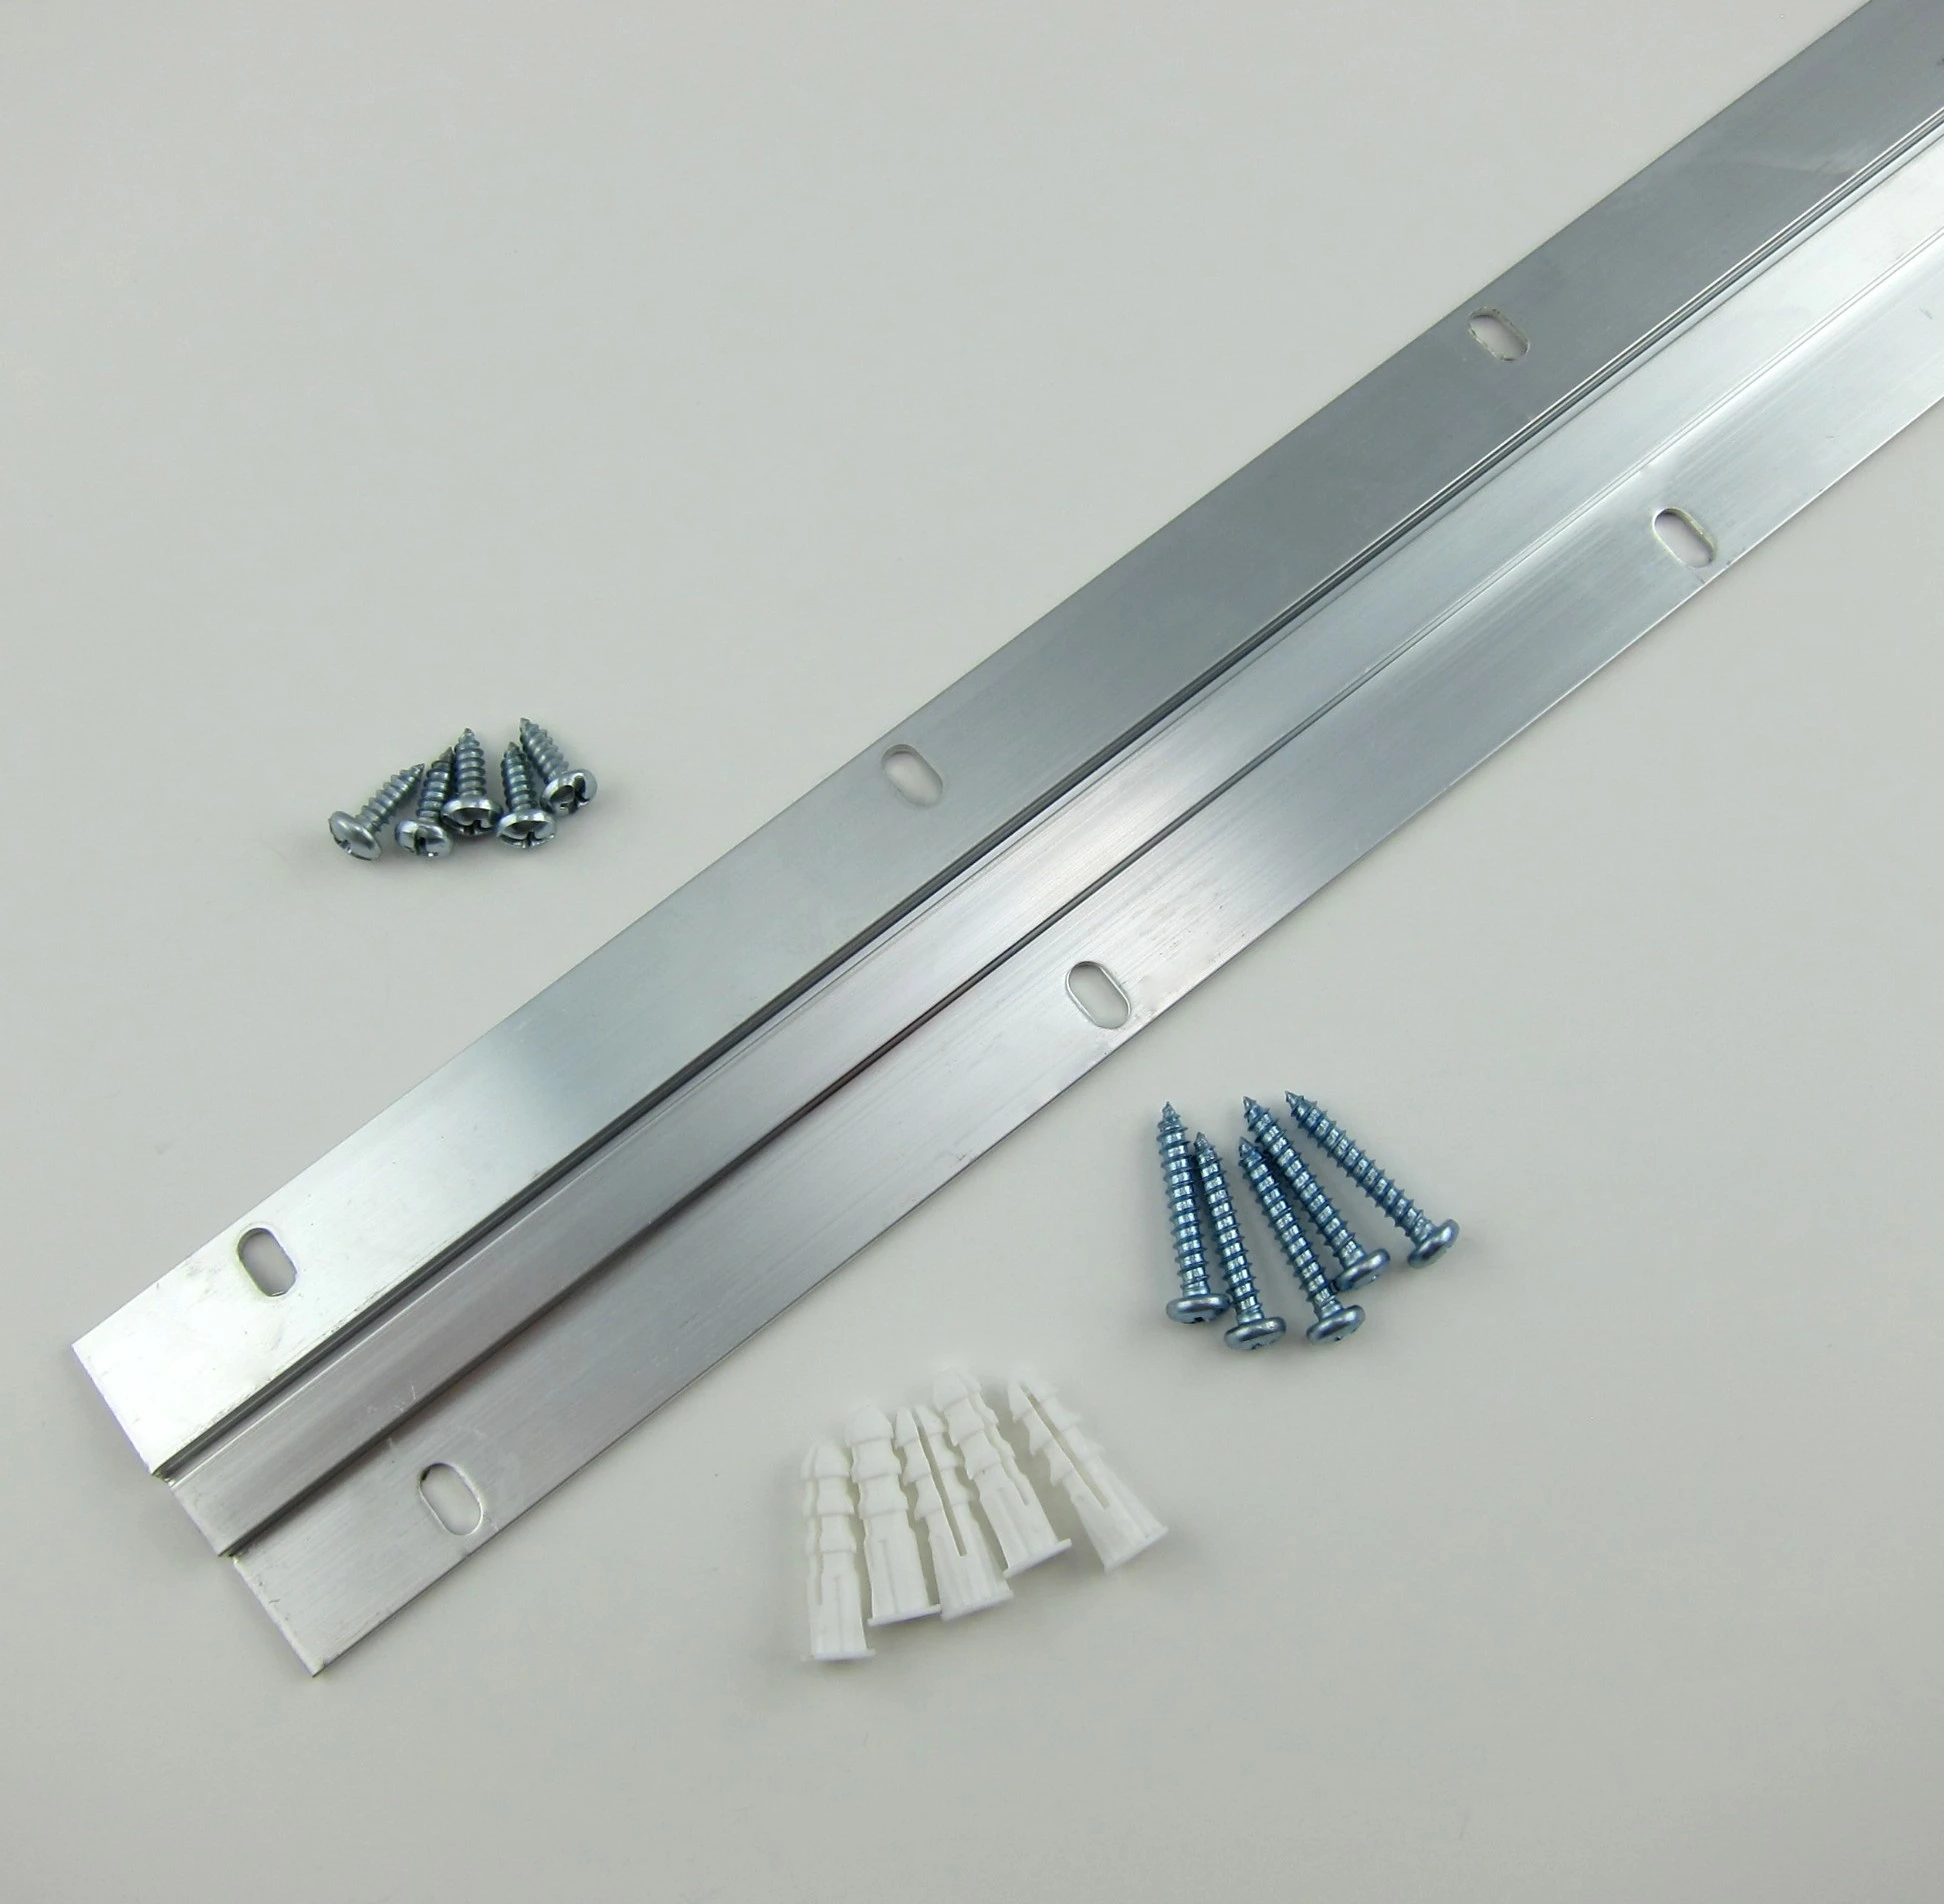 The heavy duty z clips can be used for hanging fixtures flush to your wall - the hardware remains completely concealed.